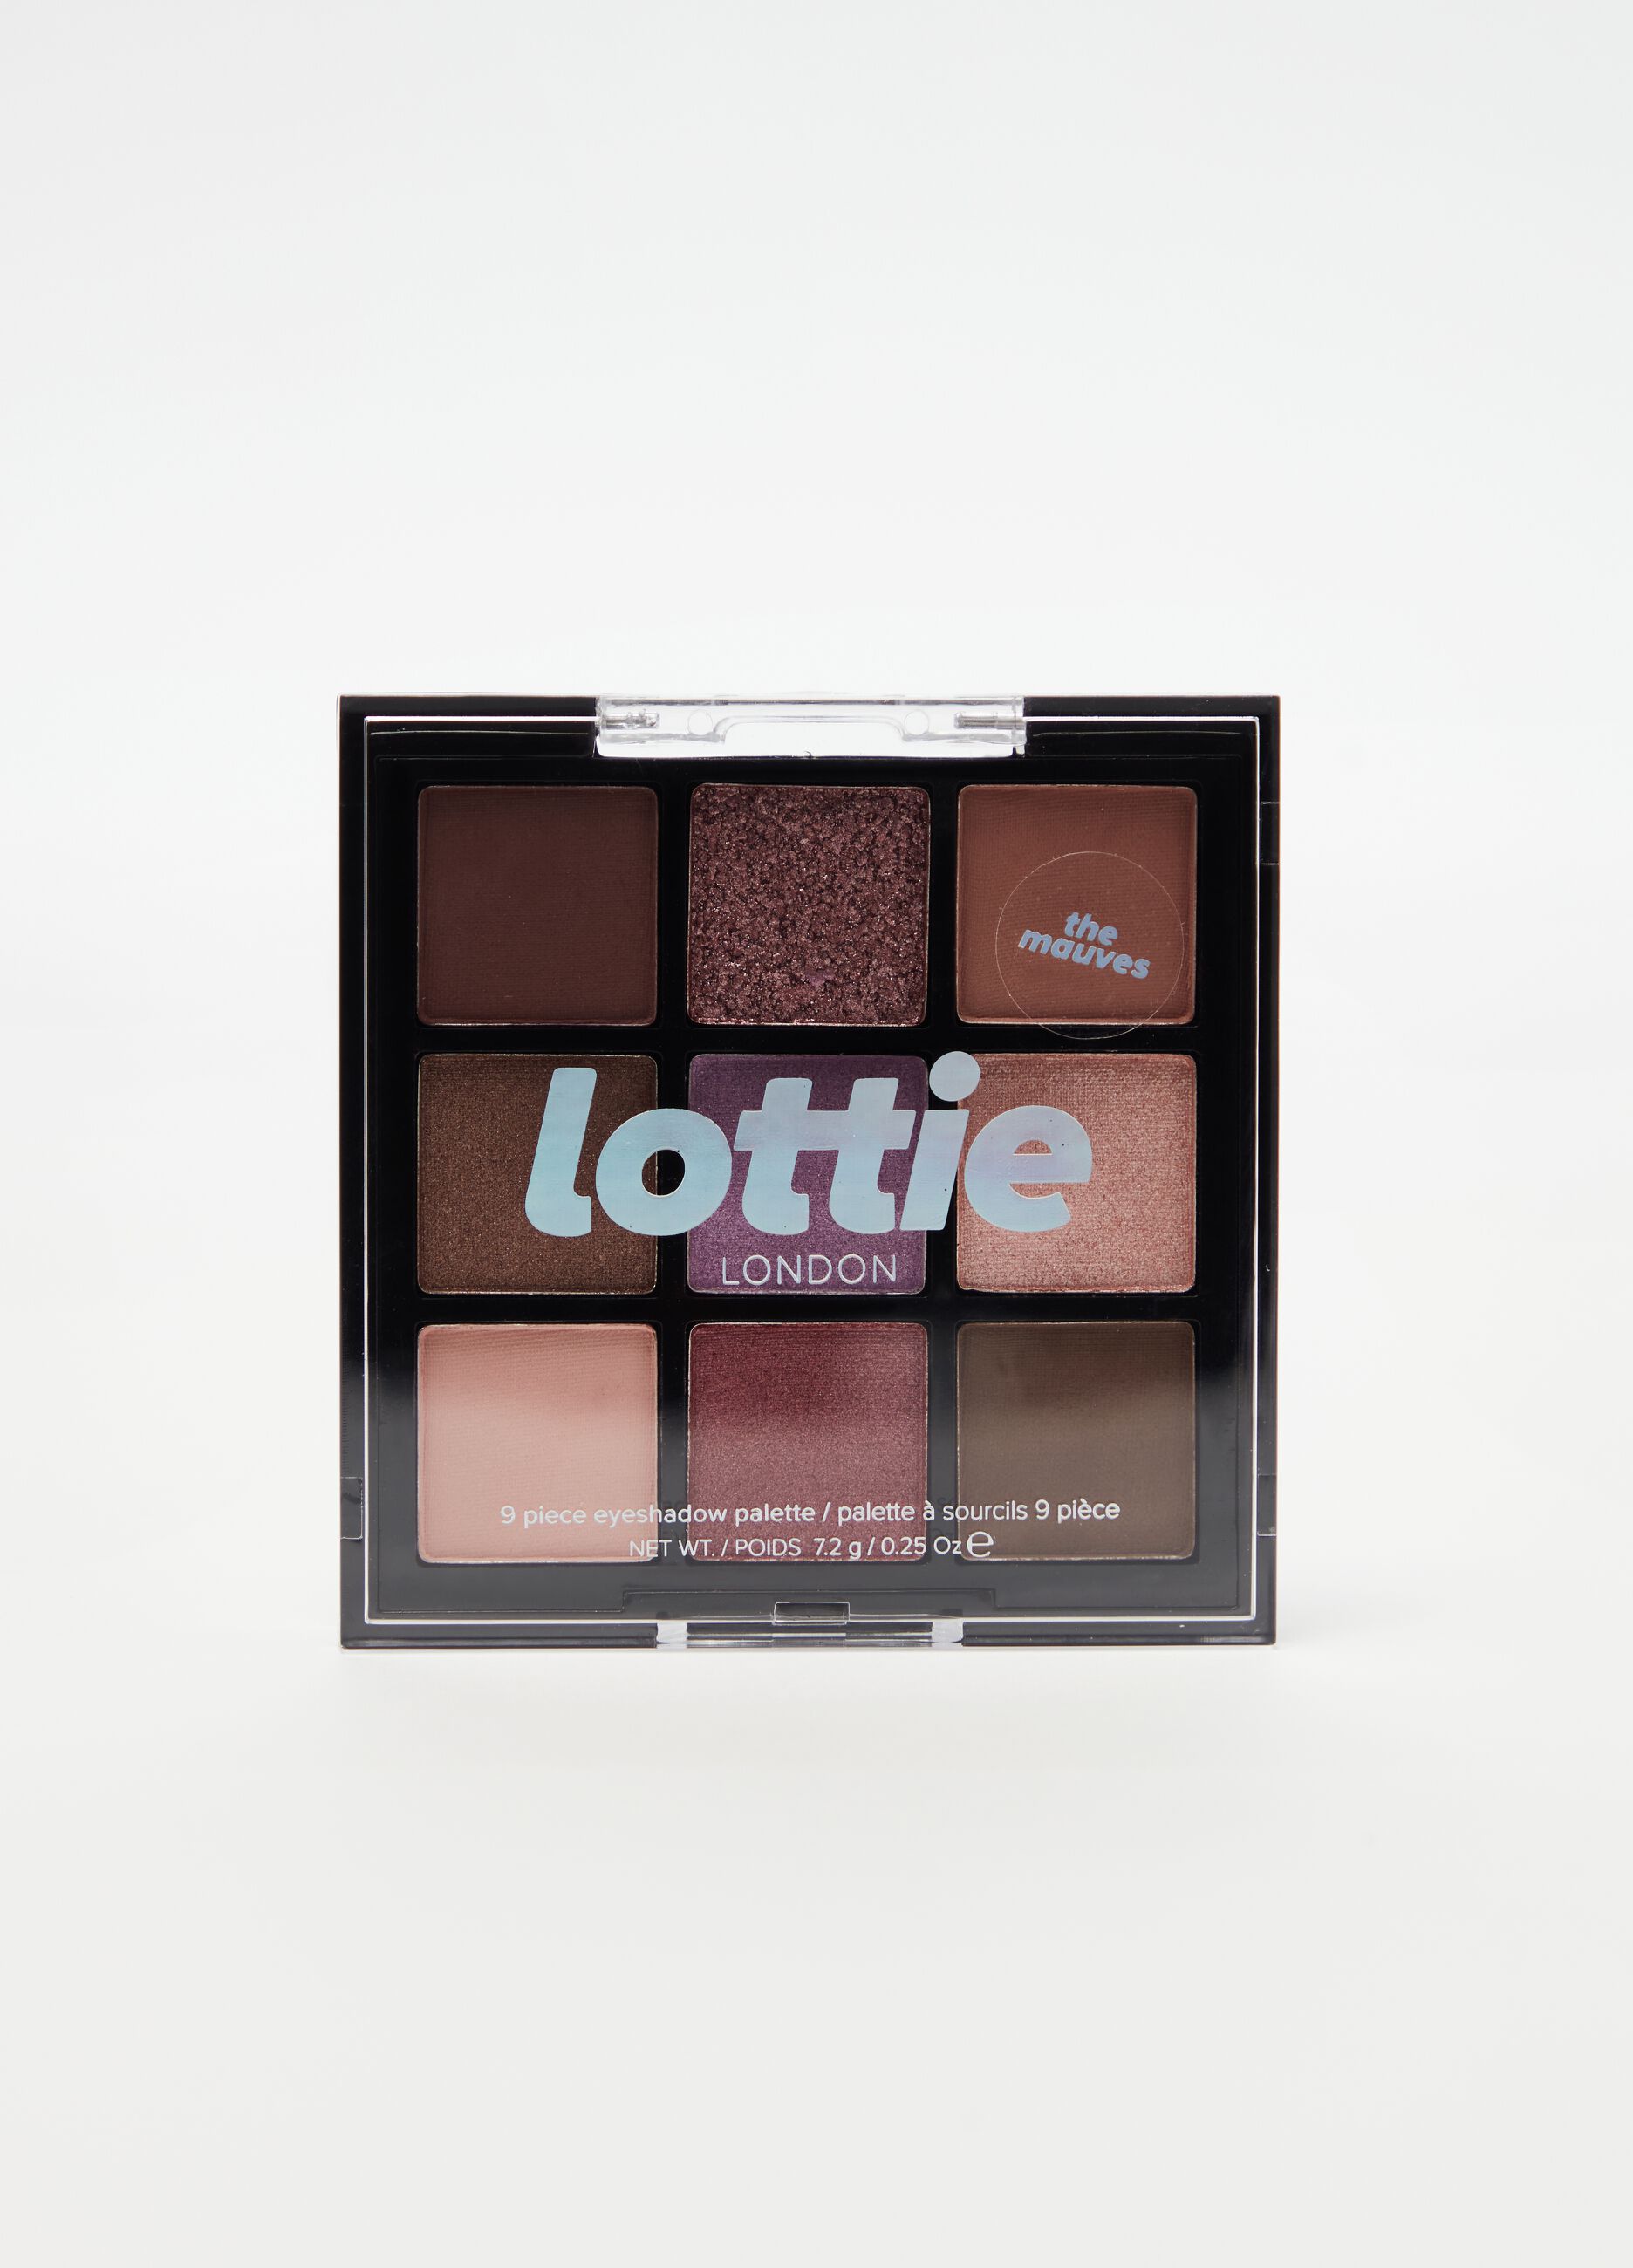 The Mauves eyeshadow palette